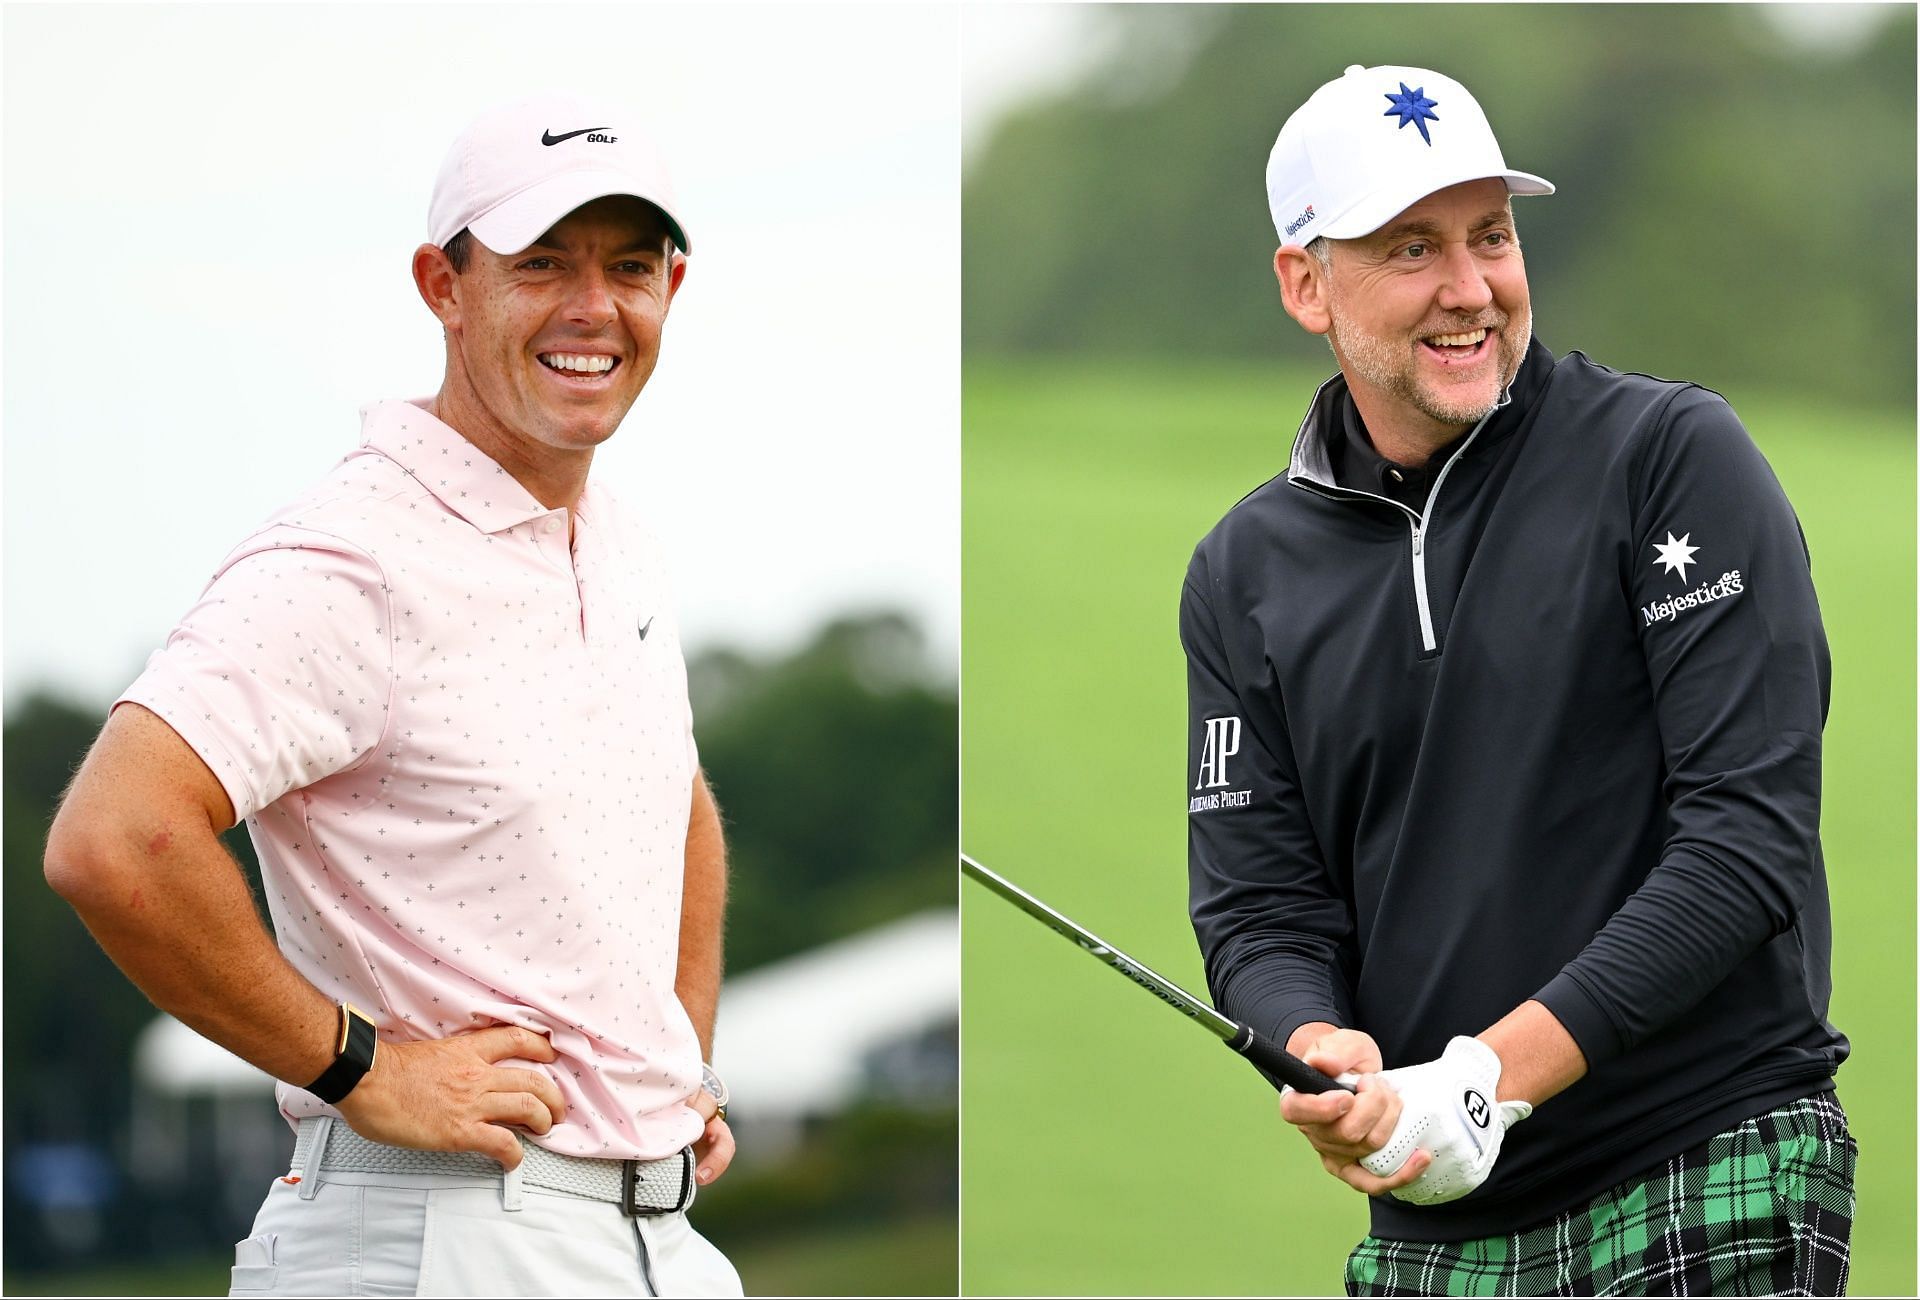 Rory McIlroy and Ian Poulter (via Getty Images)